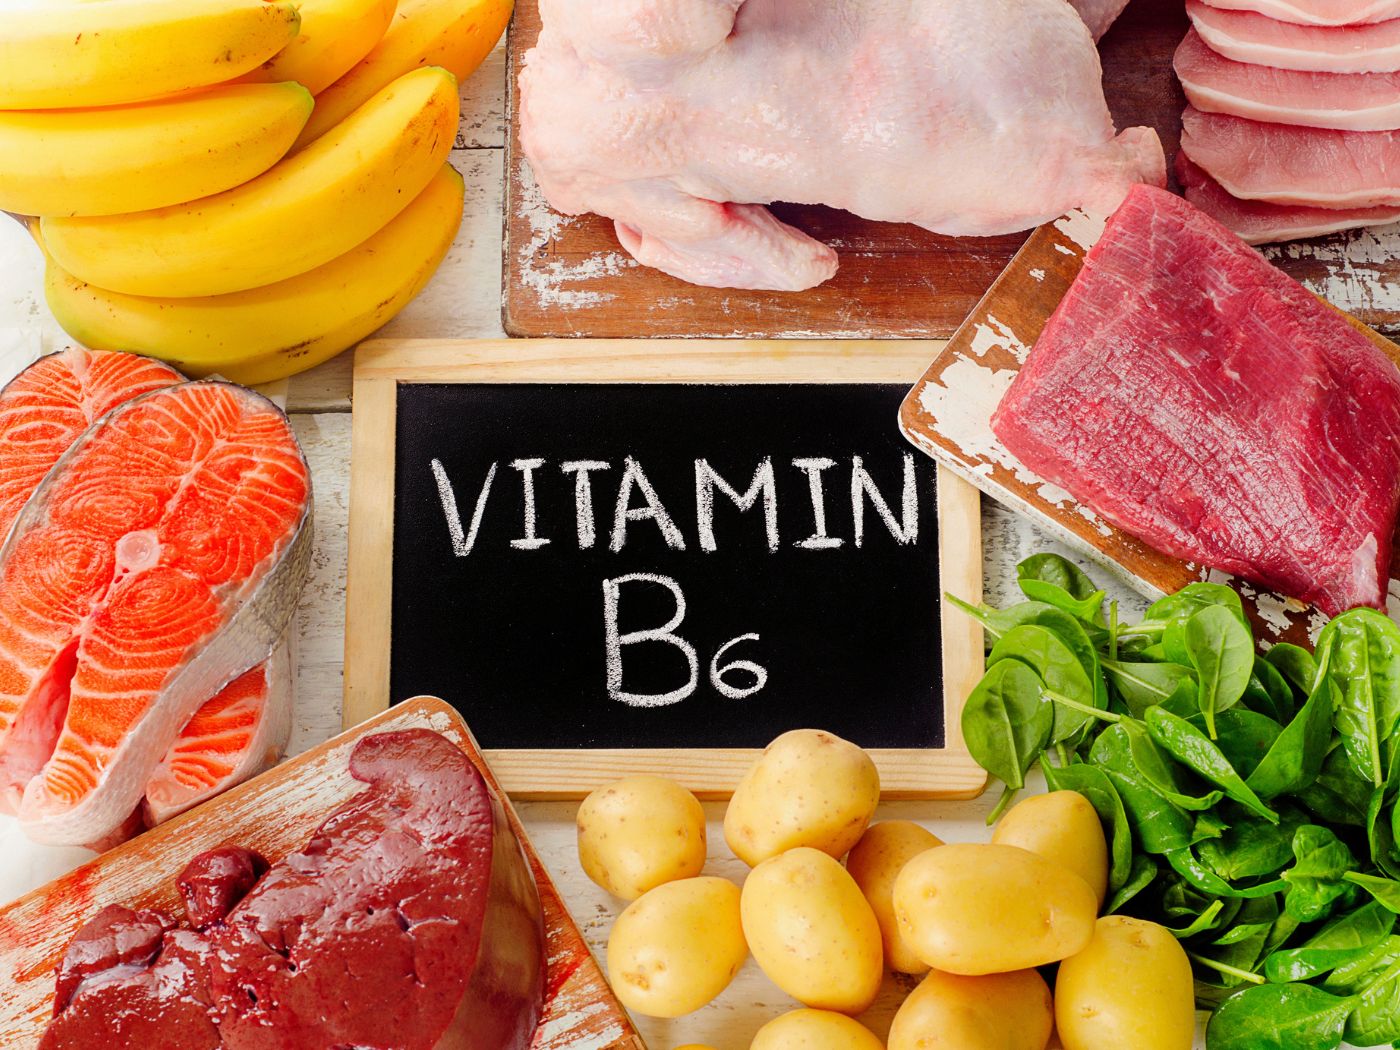 Guide To Vitamin B6 - Food Sources, Benefits, & More - Fittify